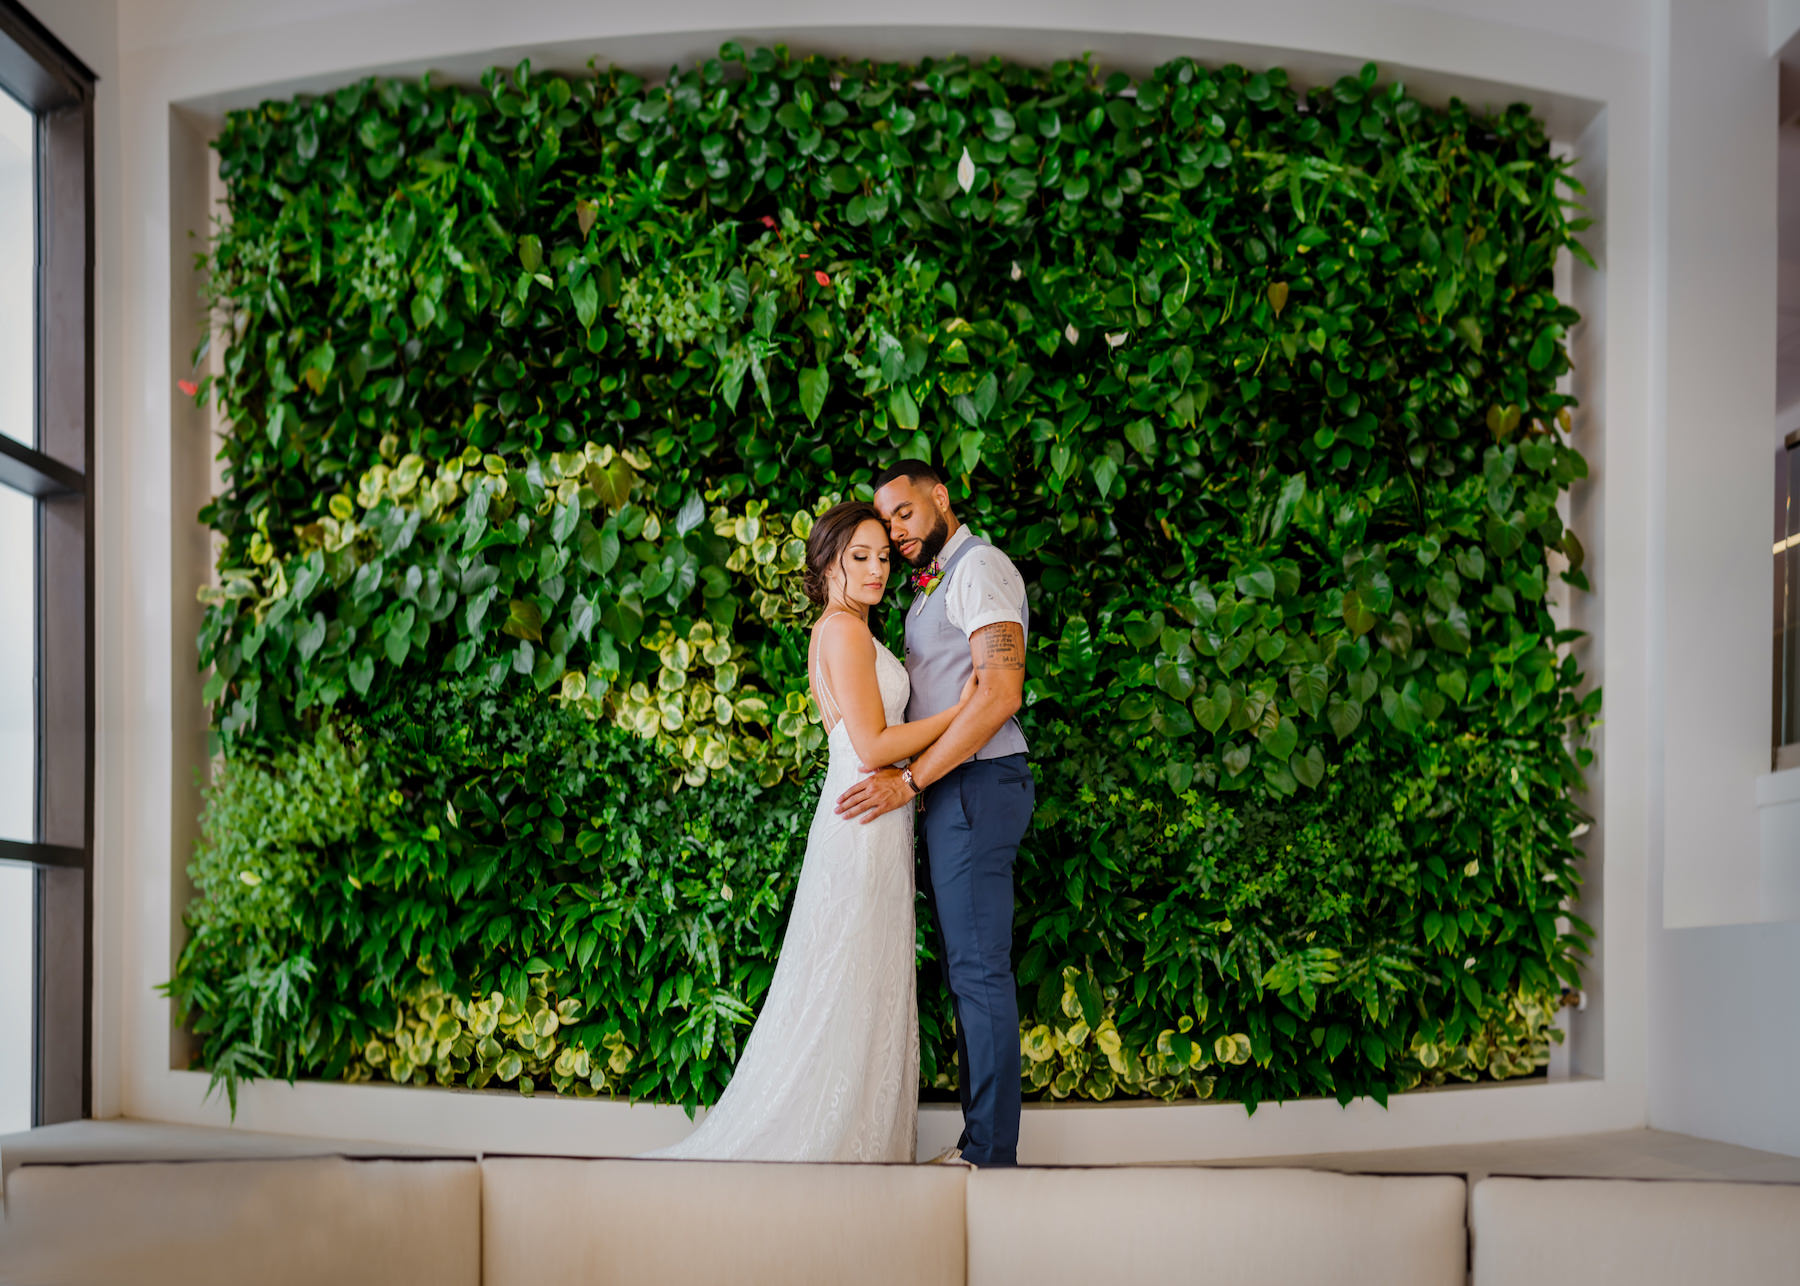 Intimate Bride and Groom First Look Wedding Portrait In Front of Greenery Hotel Backdrop | Tampa Bay Waterfront Beach Hotel Wedding Venue Hilton Clearwater Beach